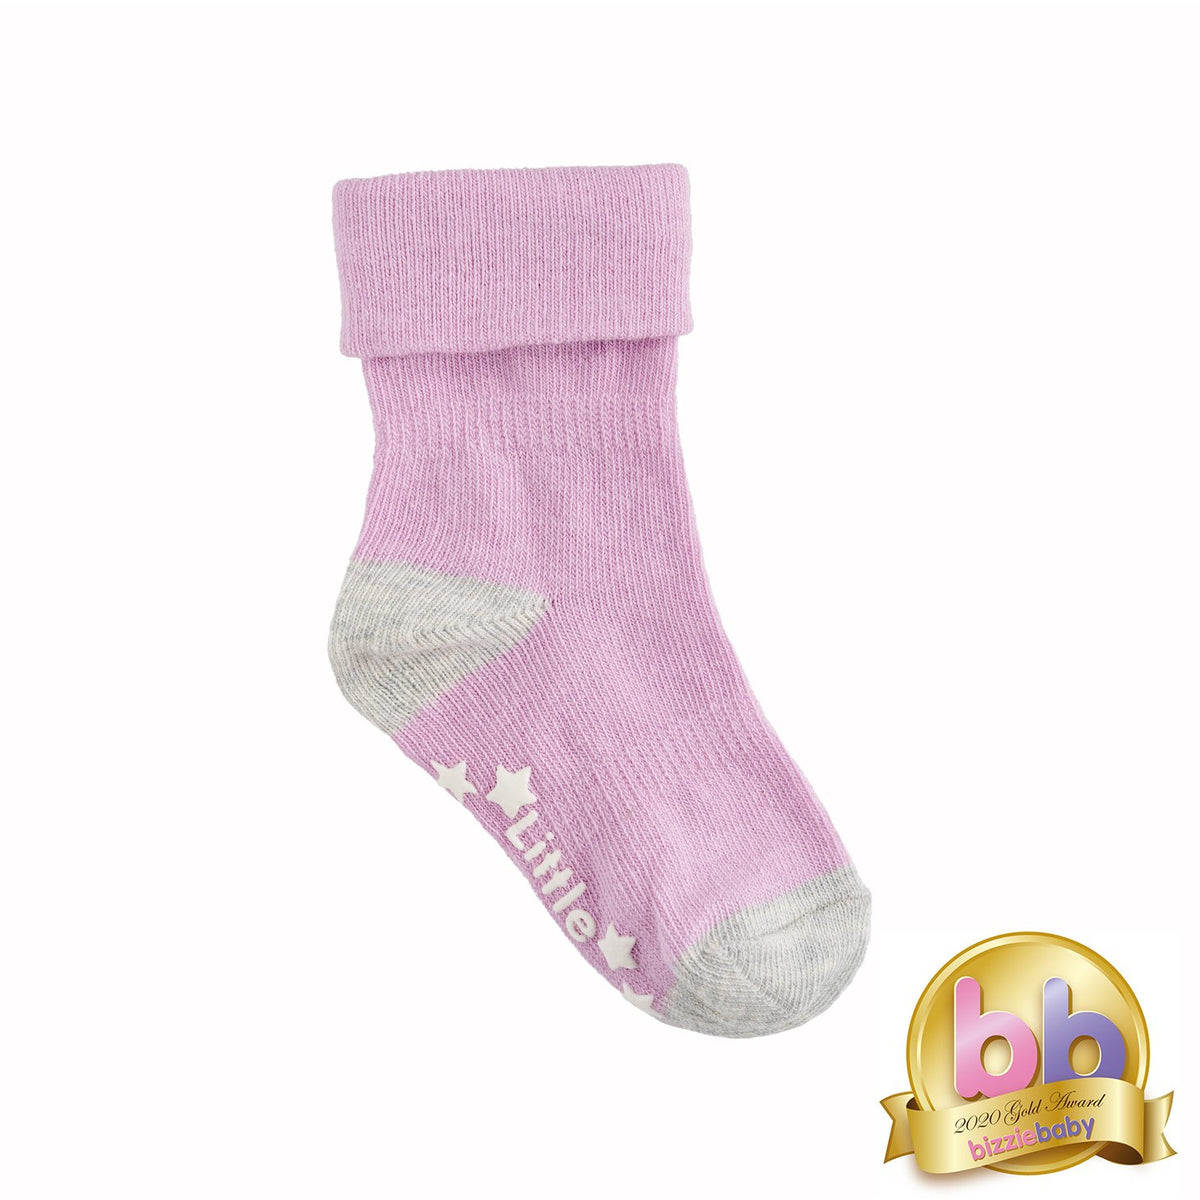 Non-Slip Stay On Socks in Lilac with Grey